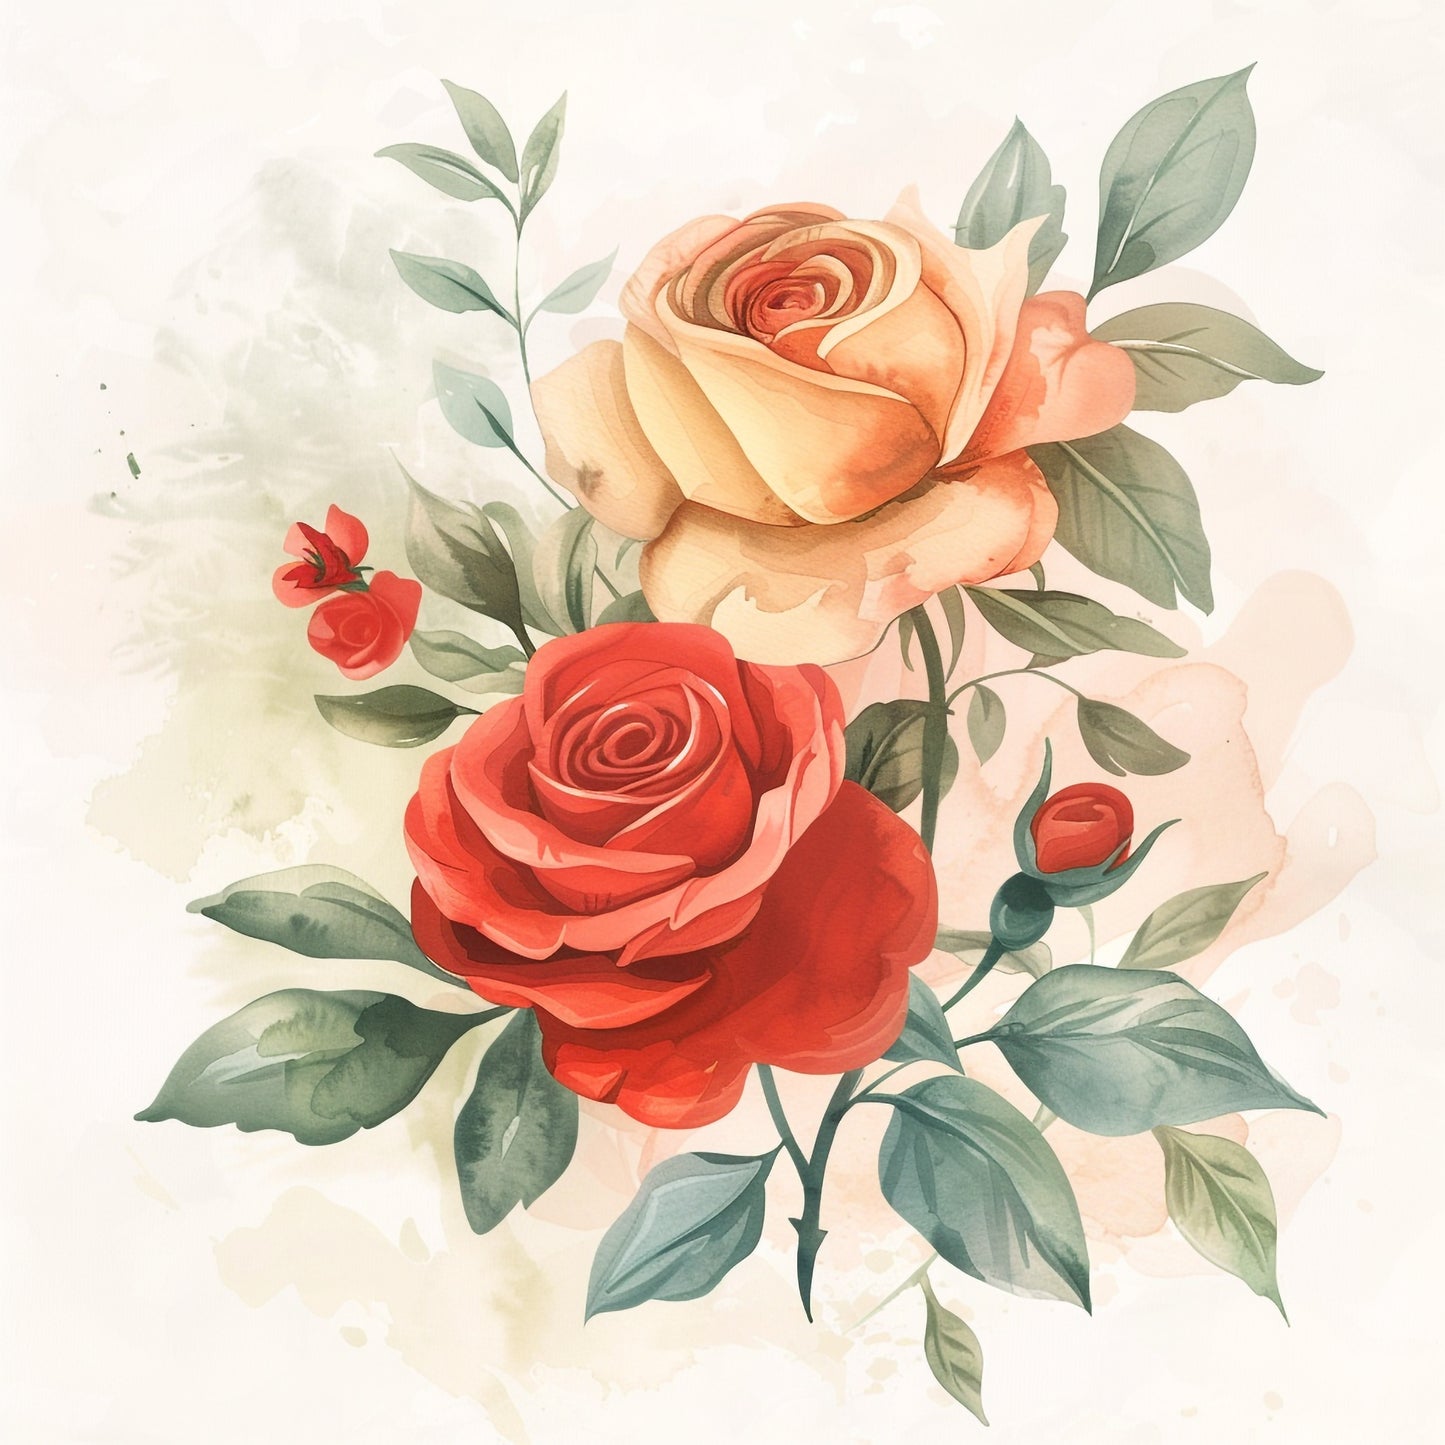 Elegant Roses with Soft Colors on Light Background